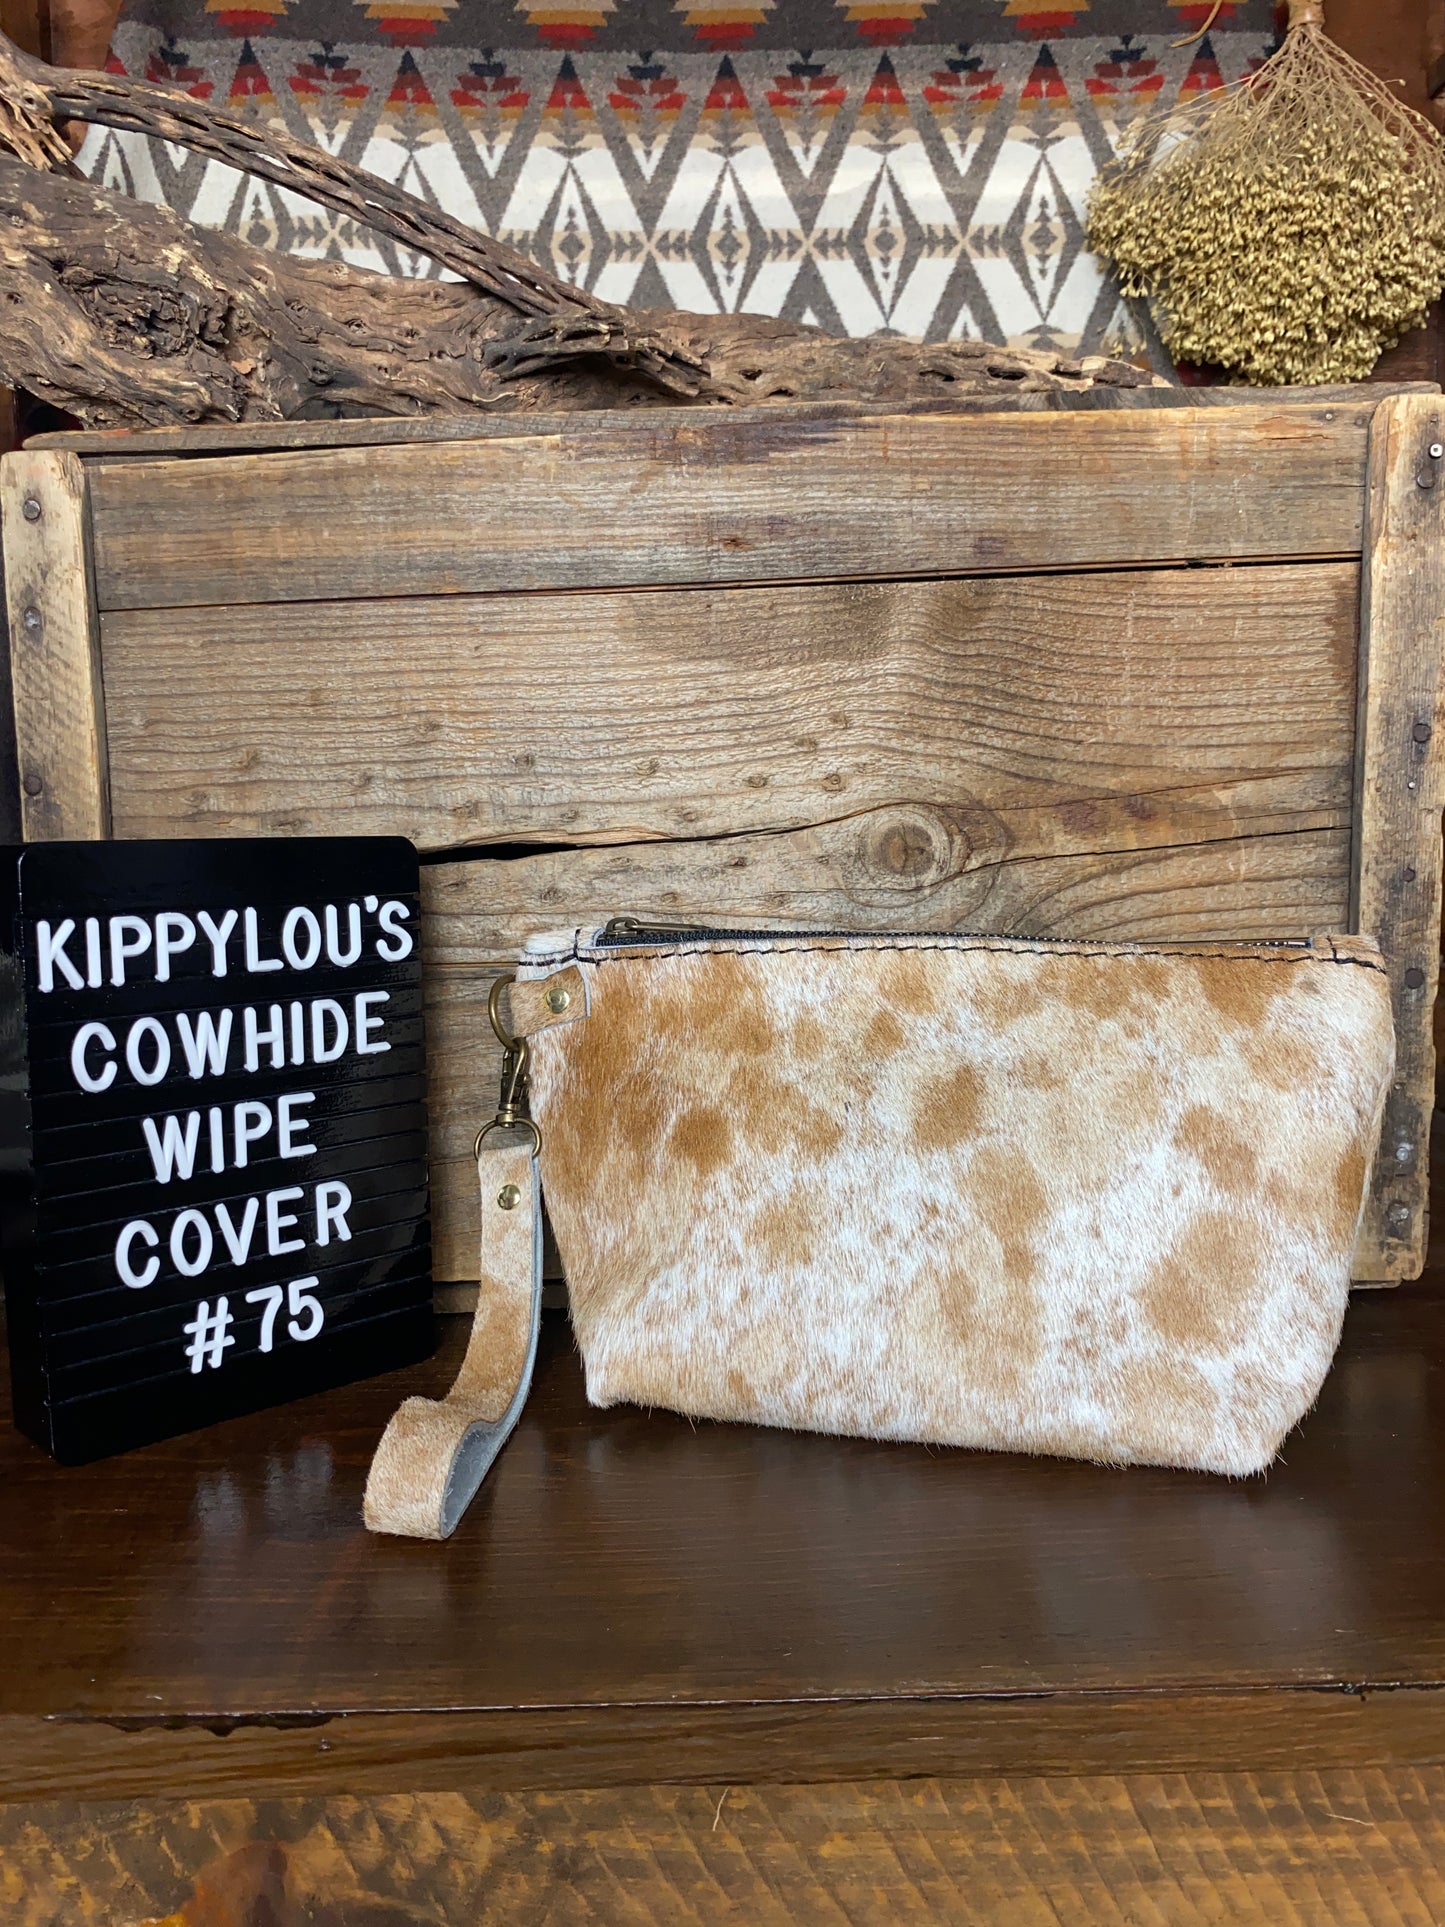 Large Cowhide Wipe Cover #75